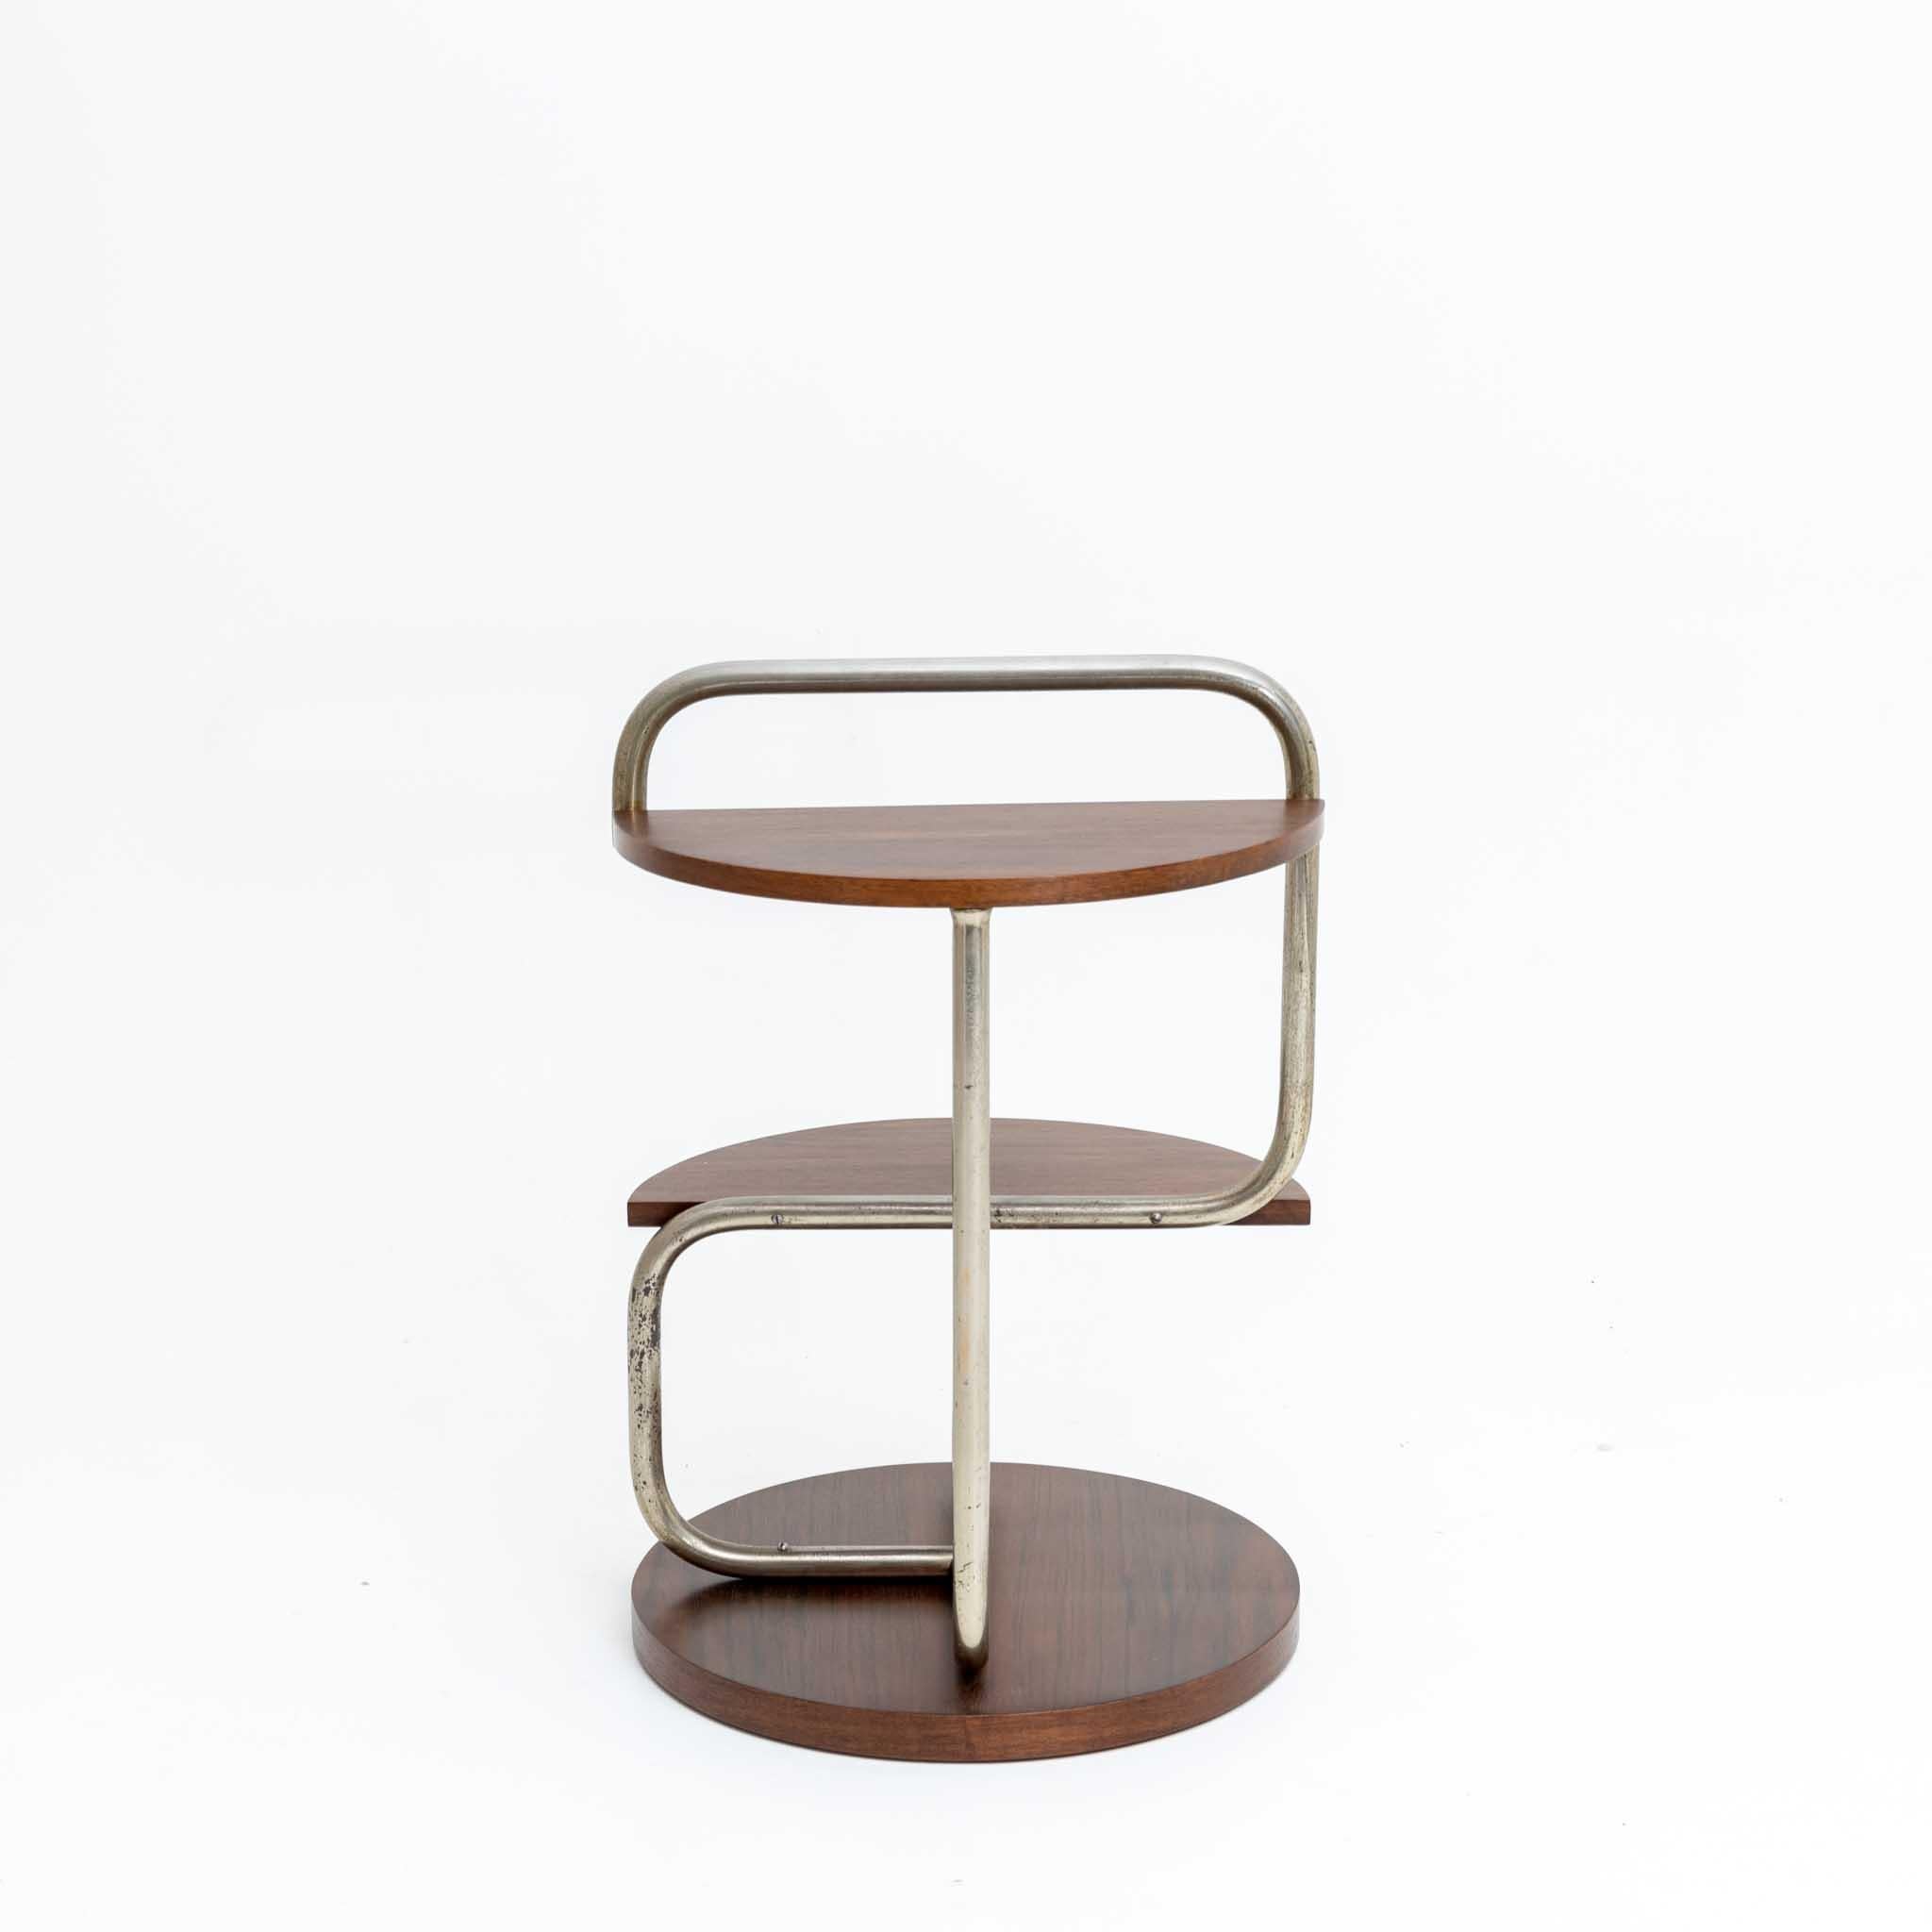 Side table on round stand with curved tubular steel frame with two shelves.